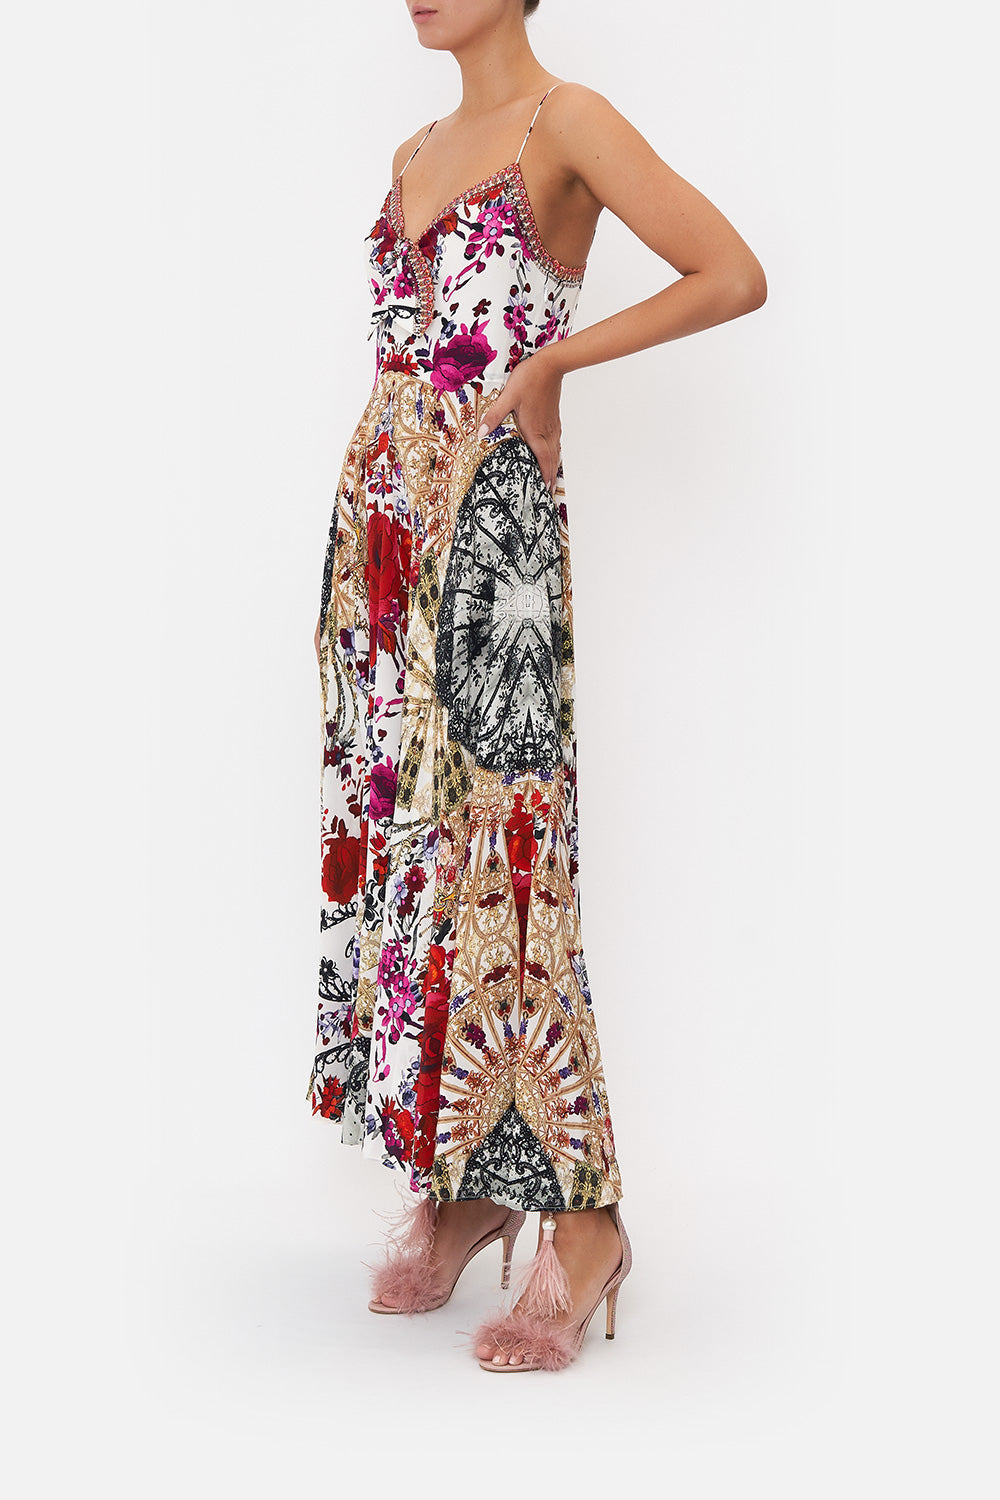 LONG DRESS WITH TIE FRONT REIGN OF ROSES